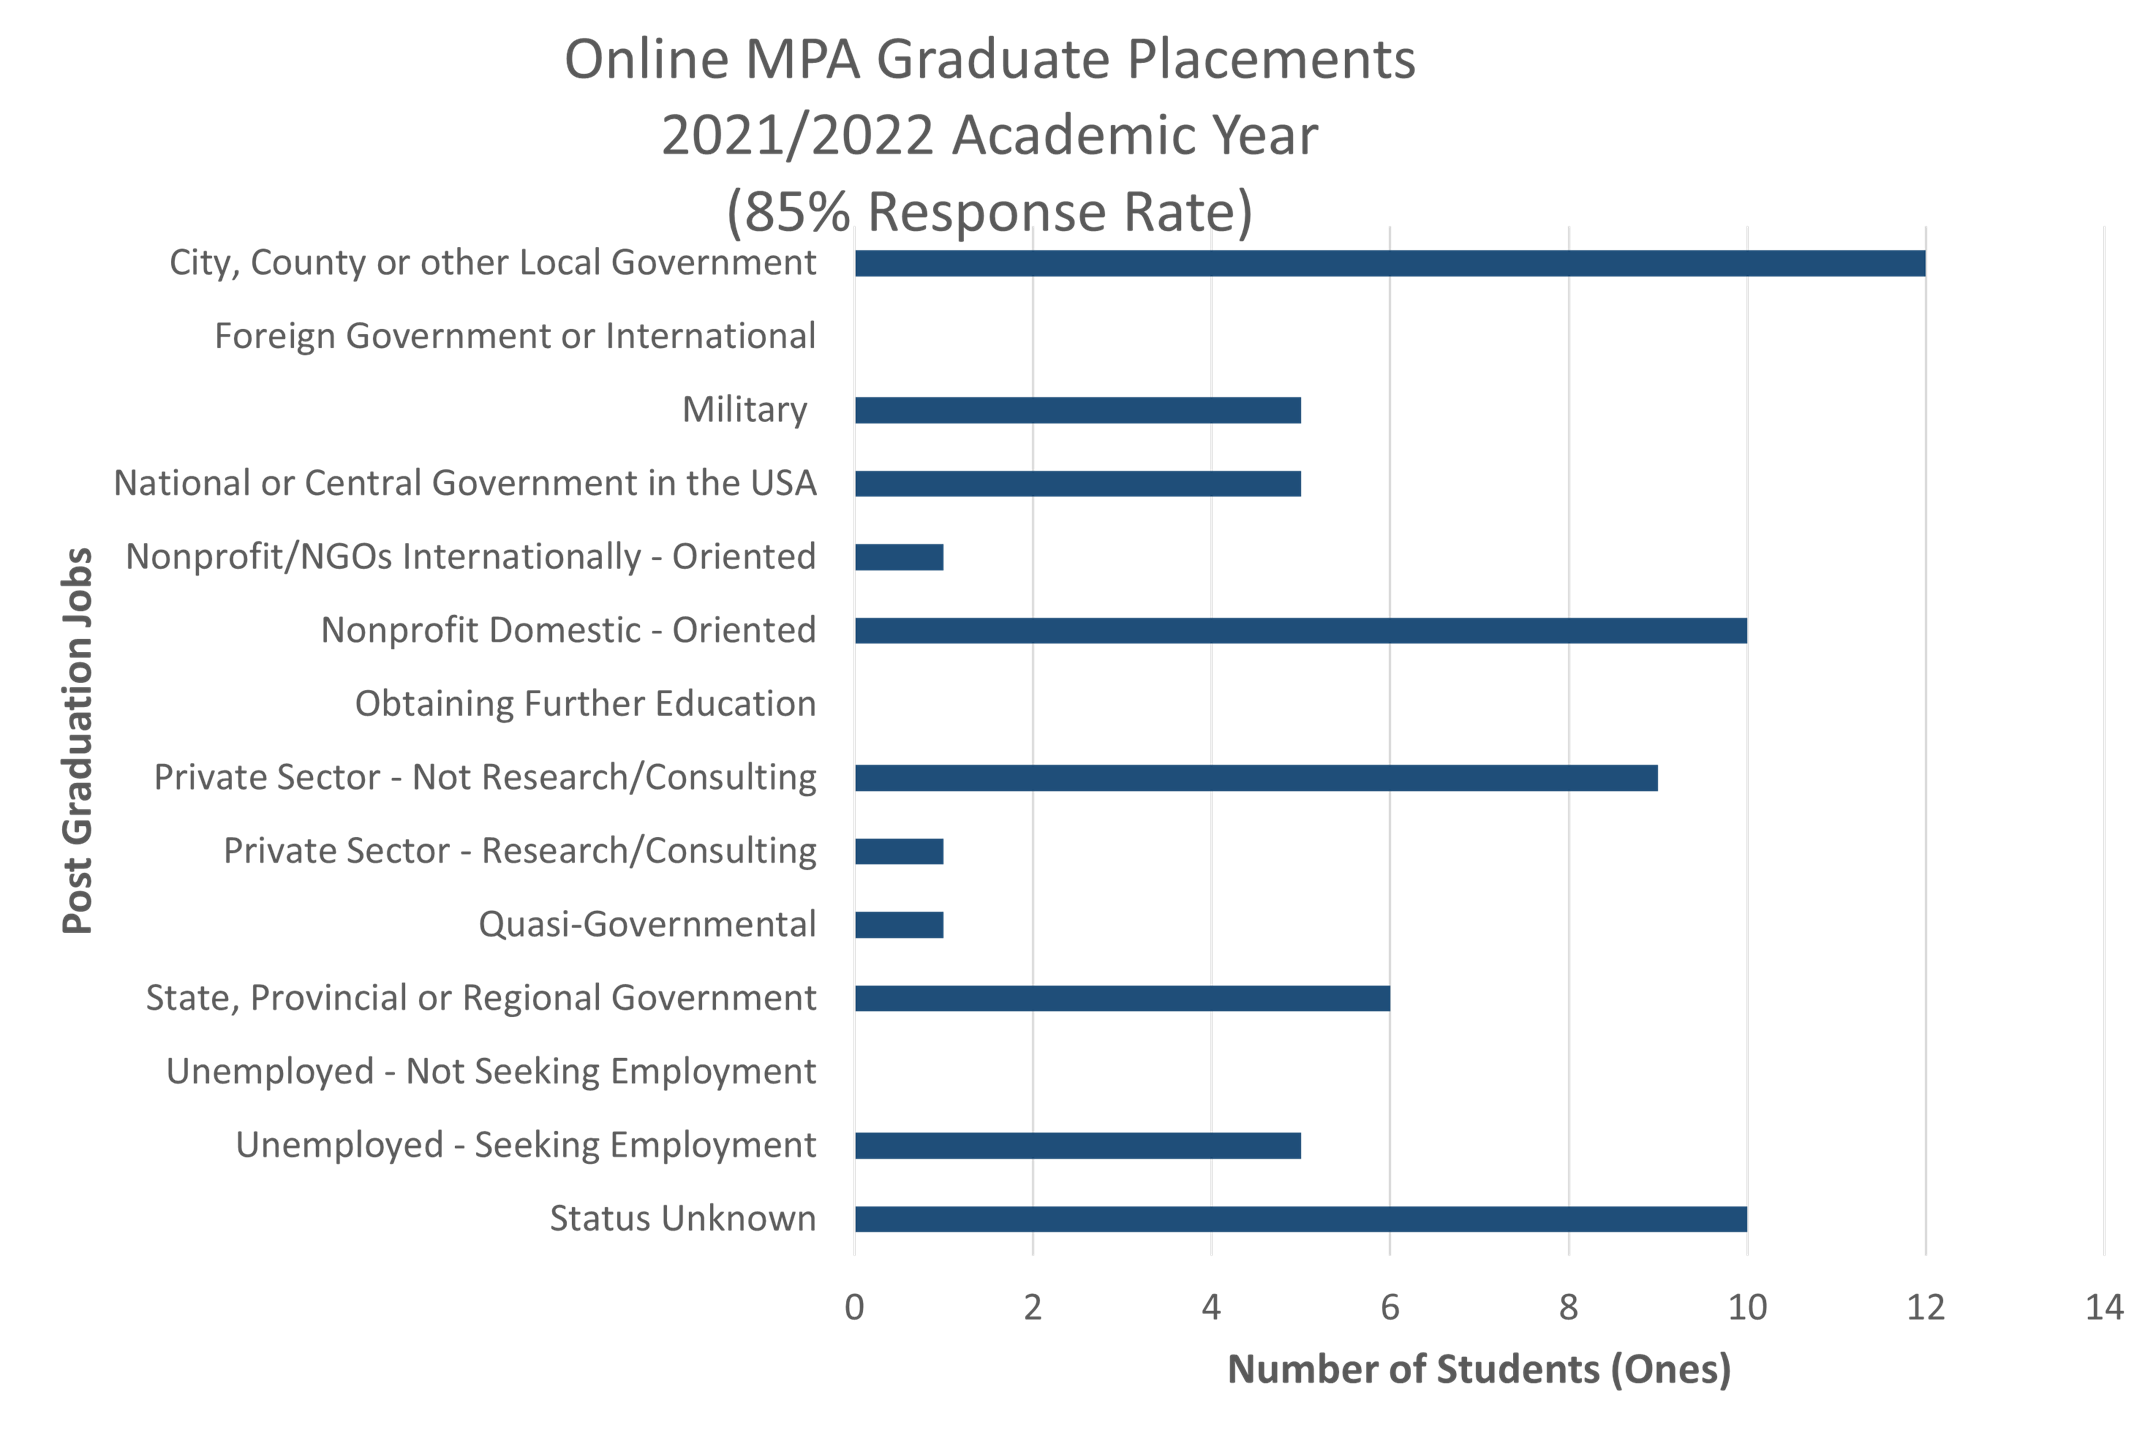 A graph illustrating the online graduate placements from the Master of Public Administration program, as of 2021-2022.